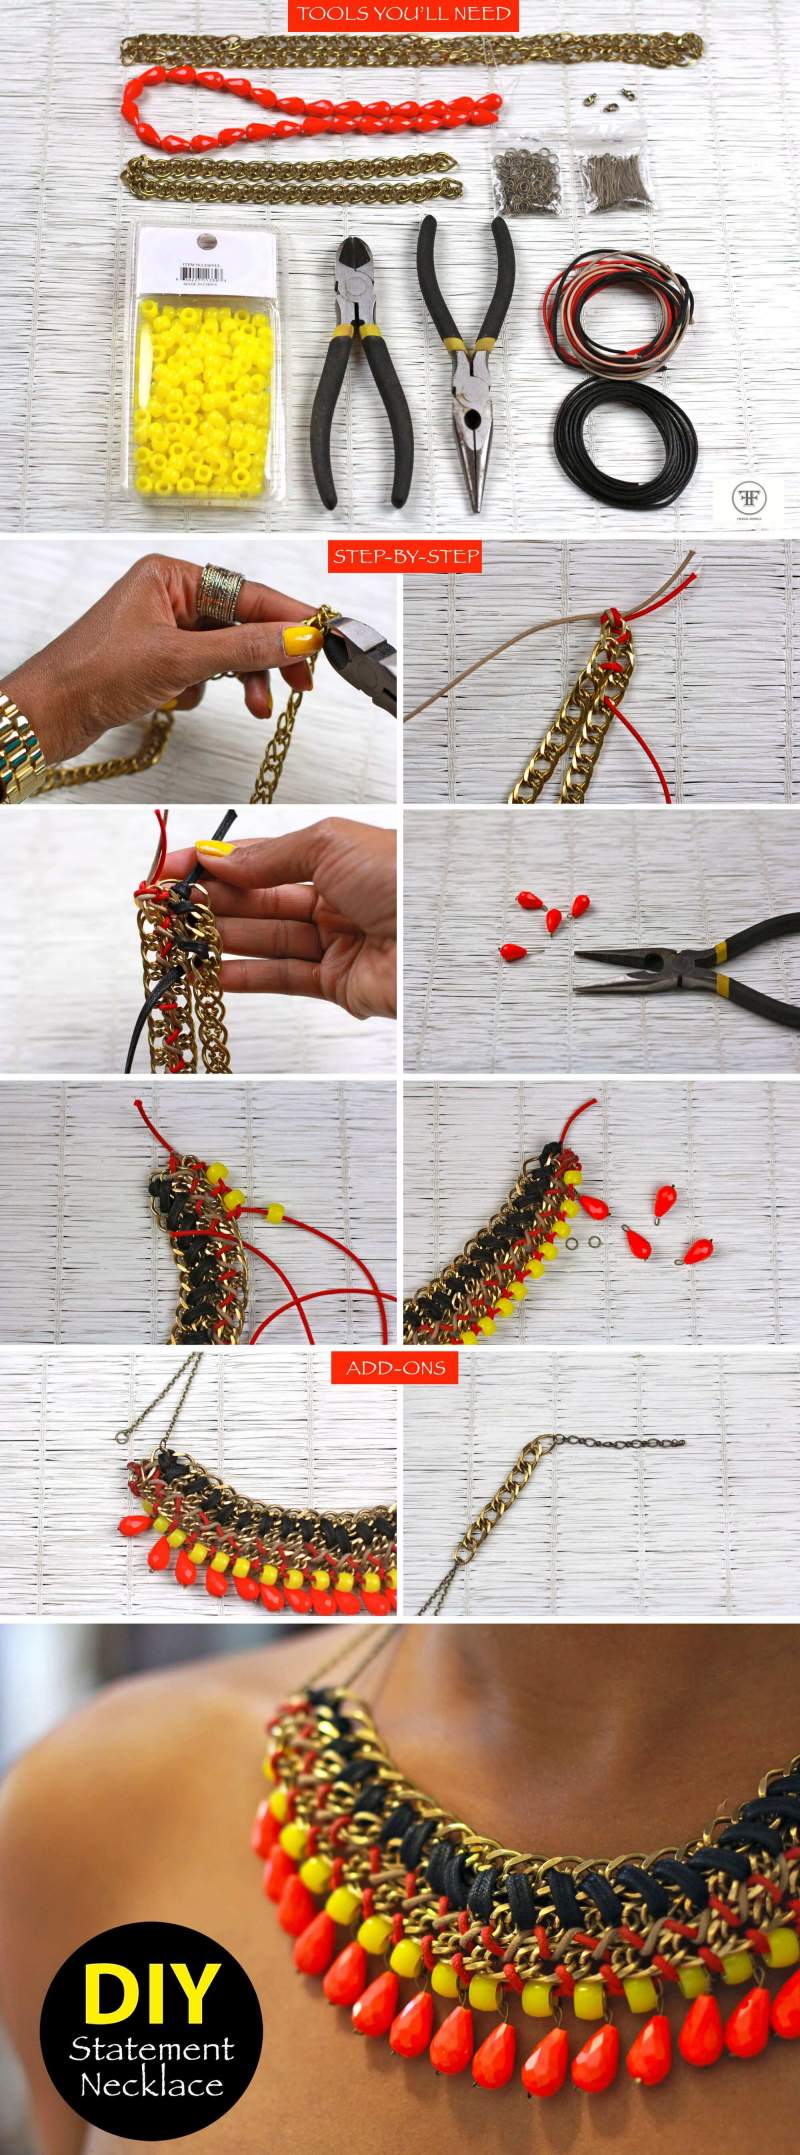 diy-statement-necklace-jewelry-tutorial Step by Step Tutorials for Handmade Necklaces